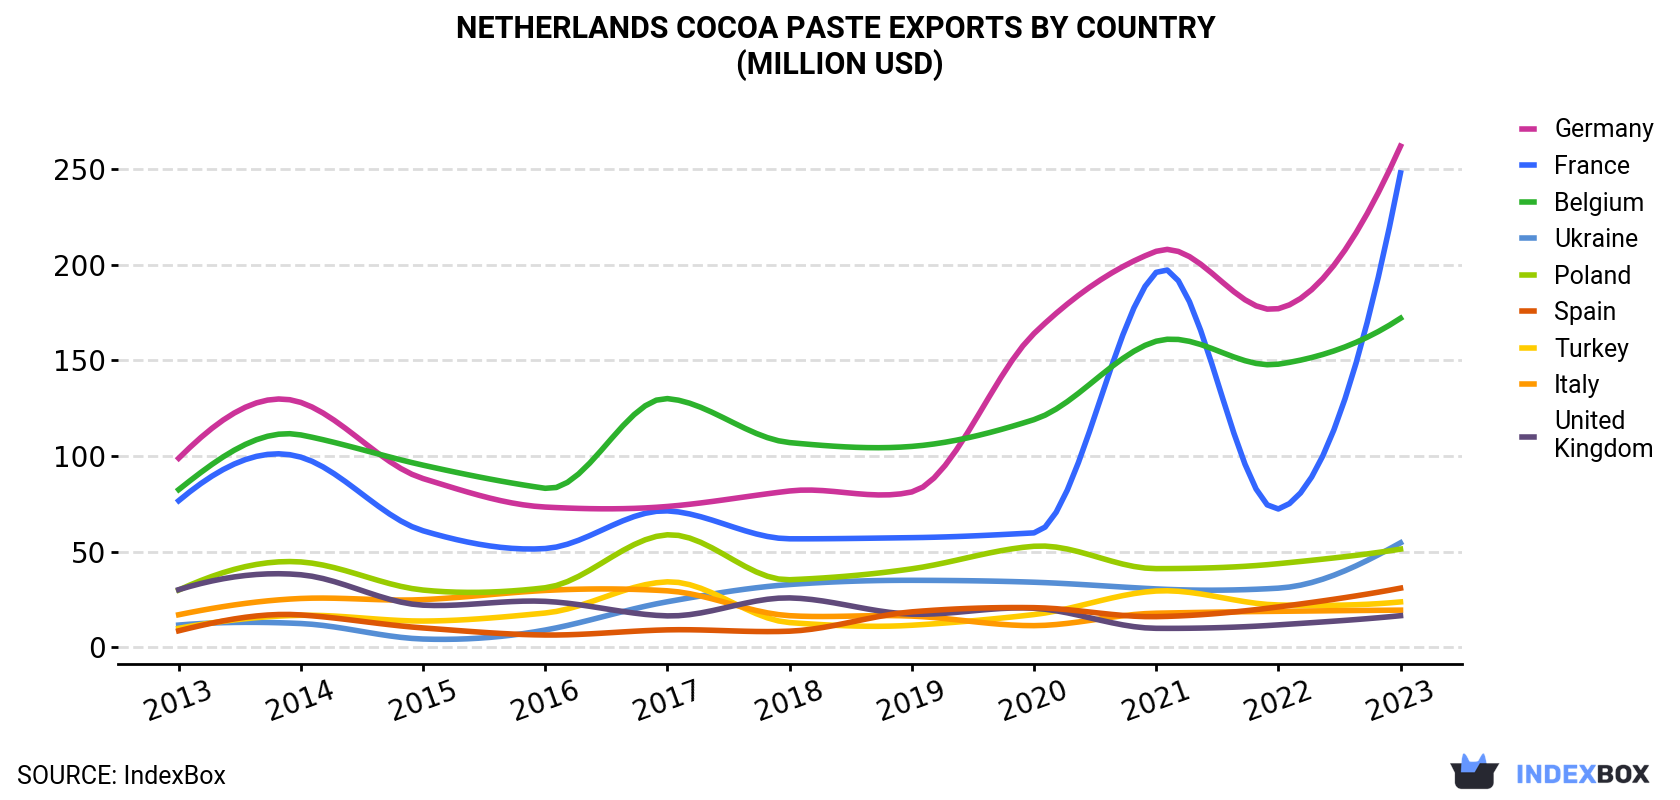 Netherlands Cocoa Paste Exports By Country (Million USD)